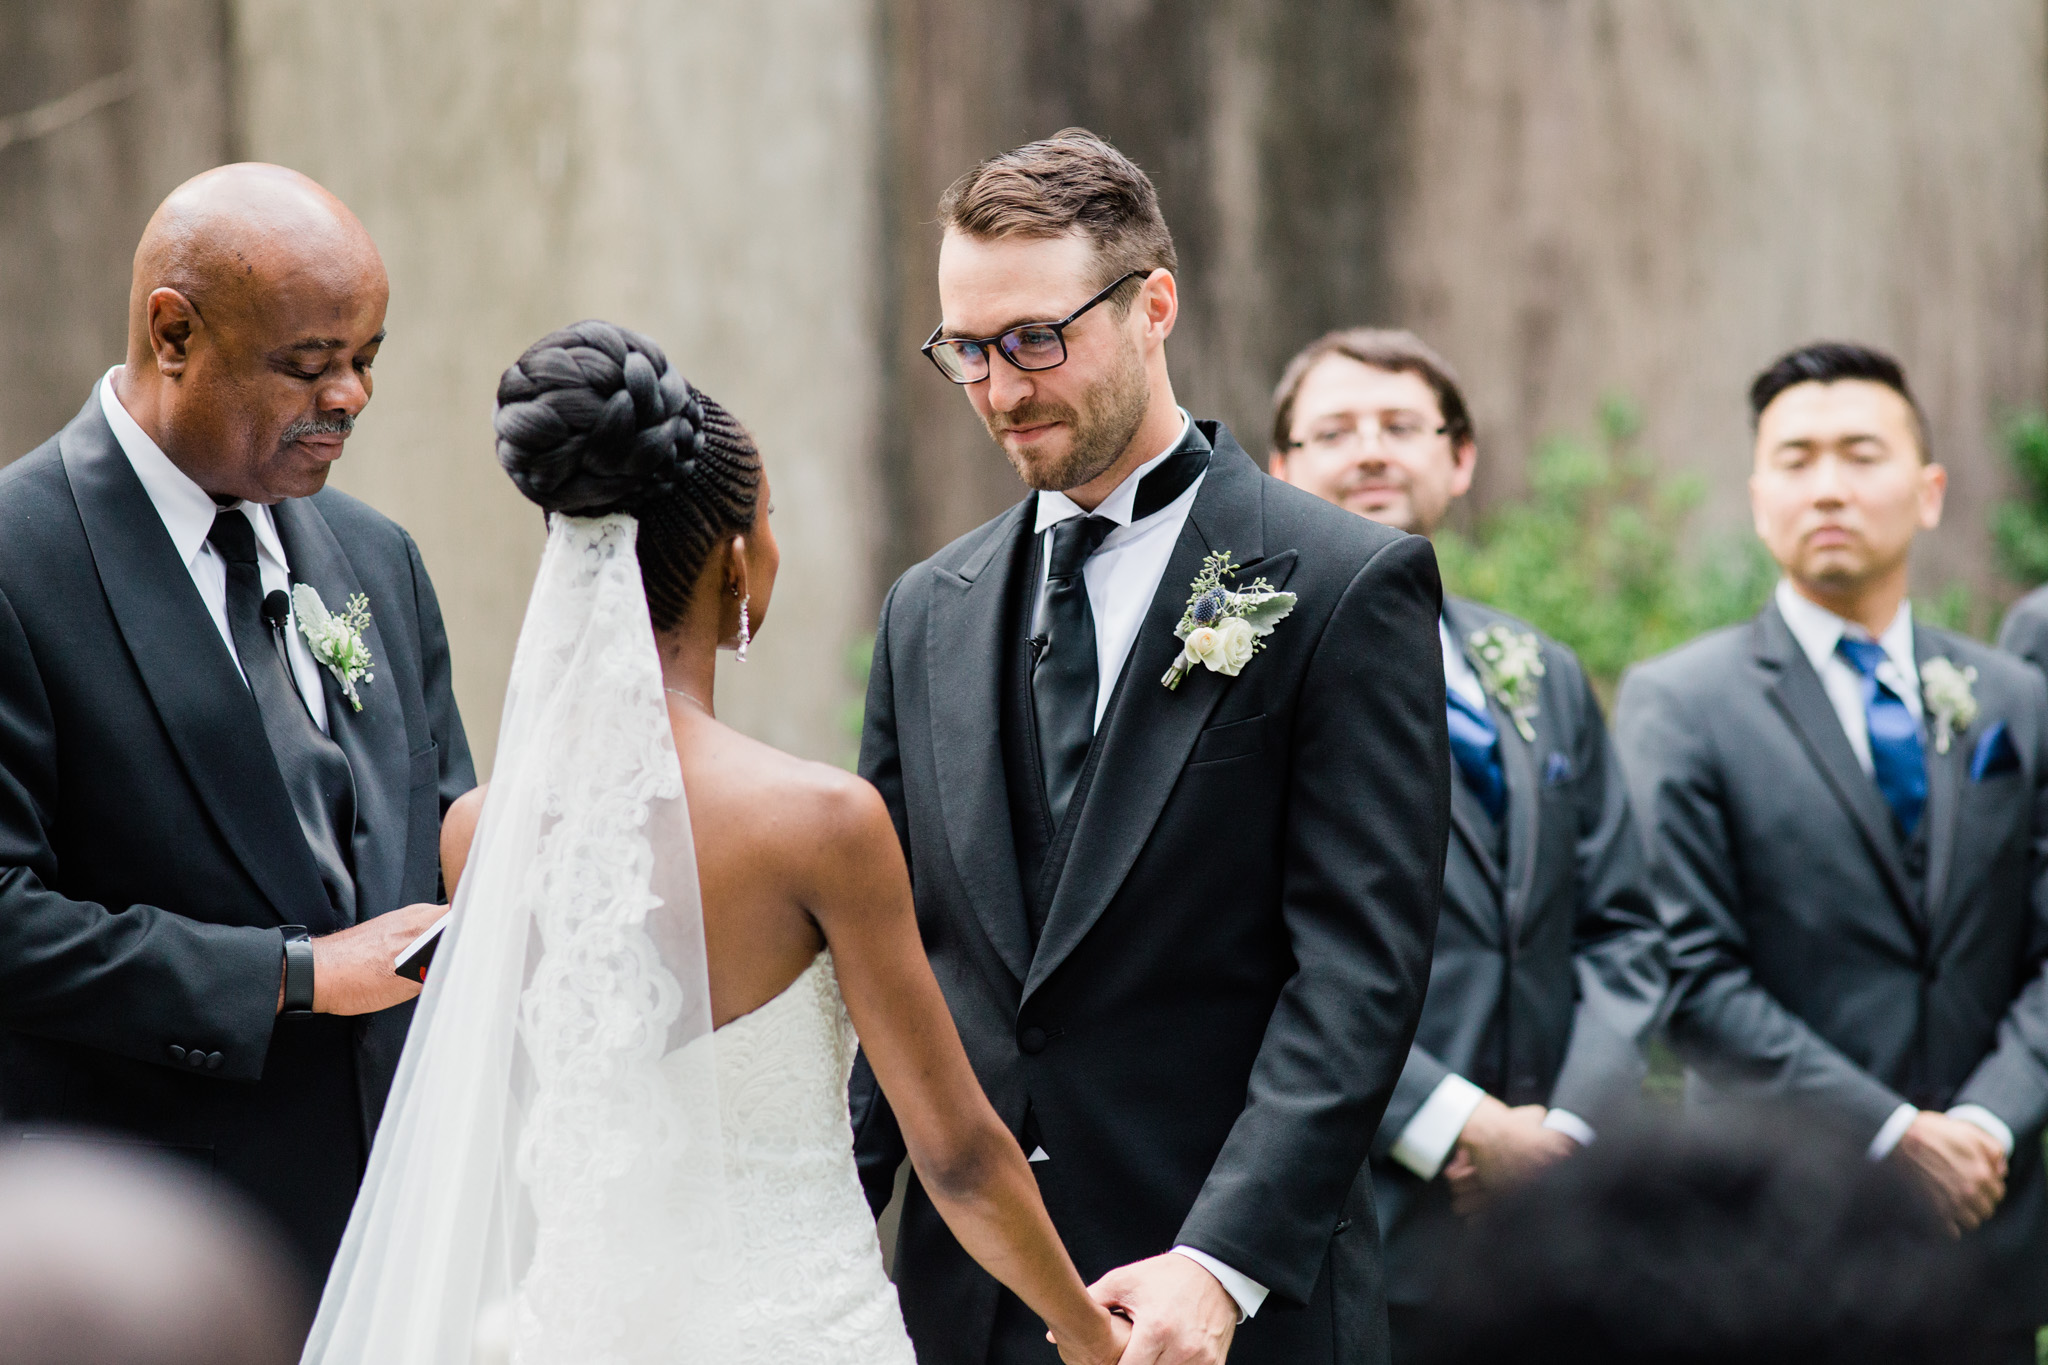 Sweet moments captured during Swan House wedding ceremony by Rebecca Cerasani